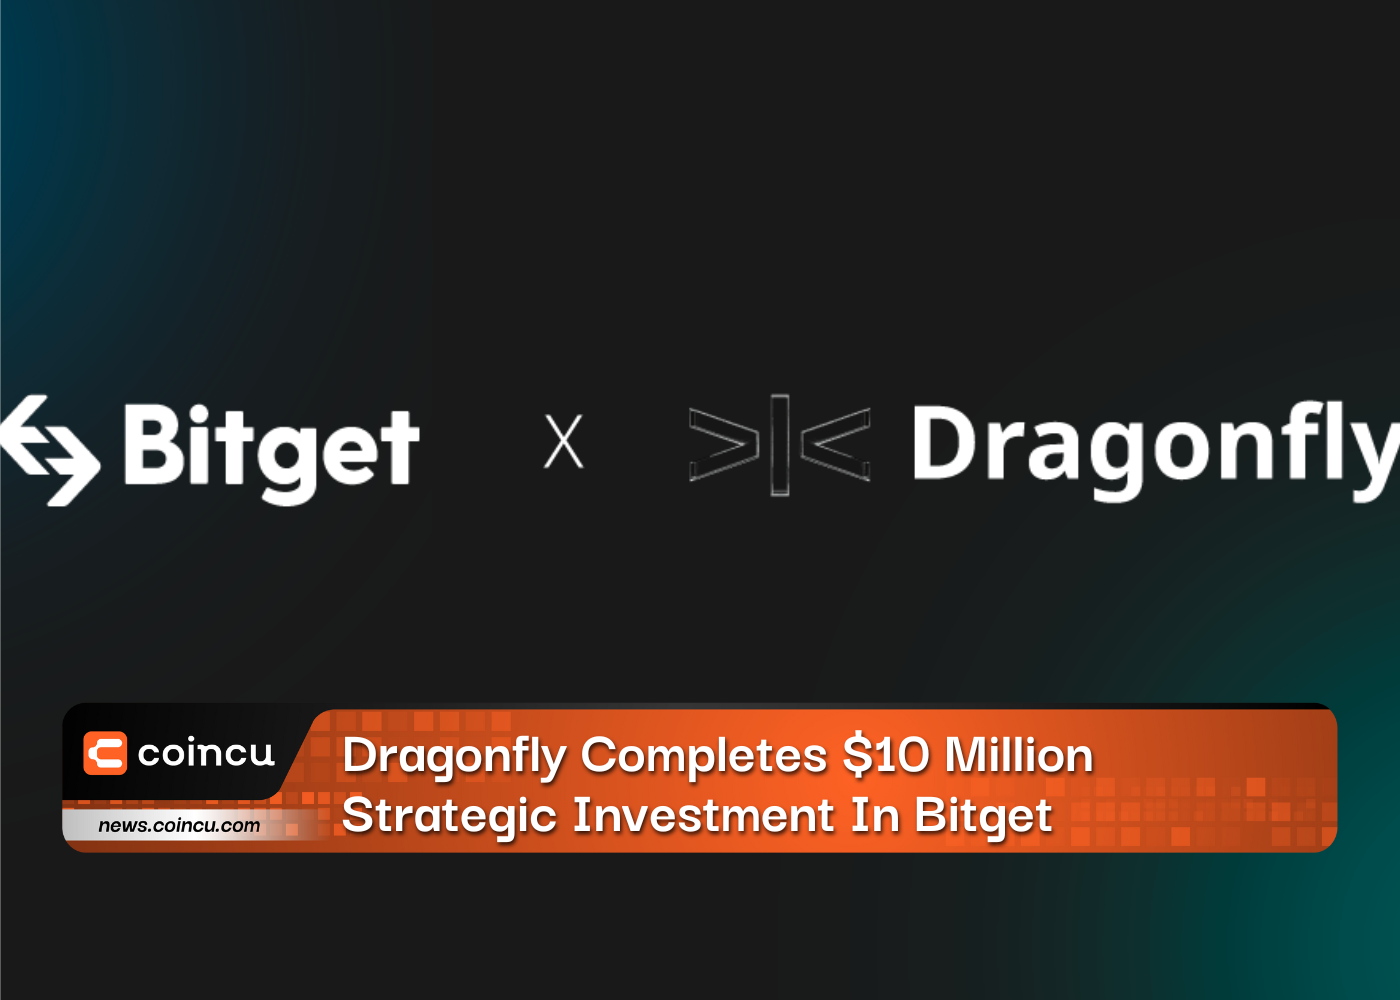 Dragonfly Completes $10 Million Strategic Investment In Bitget